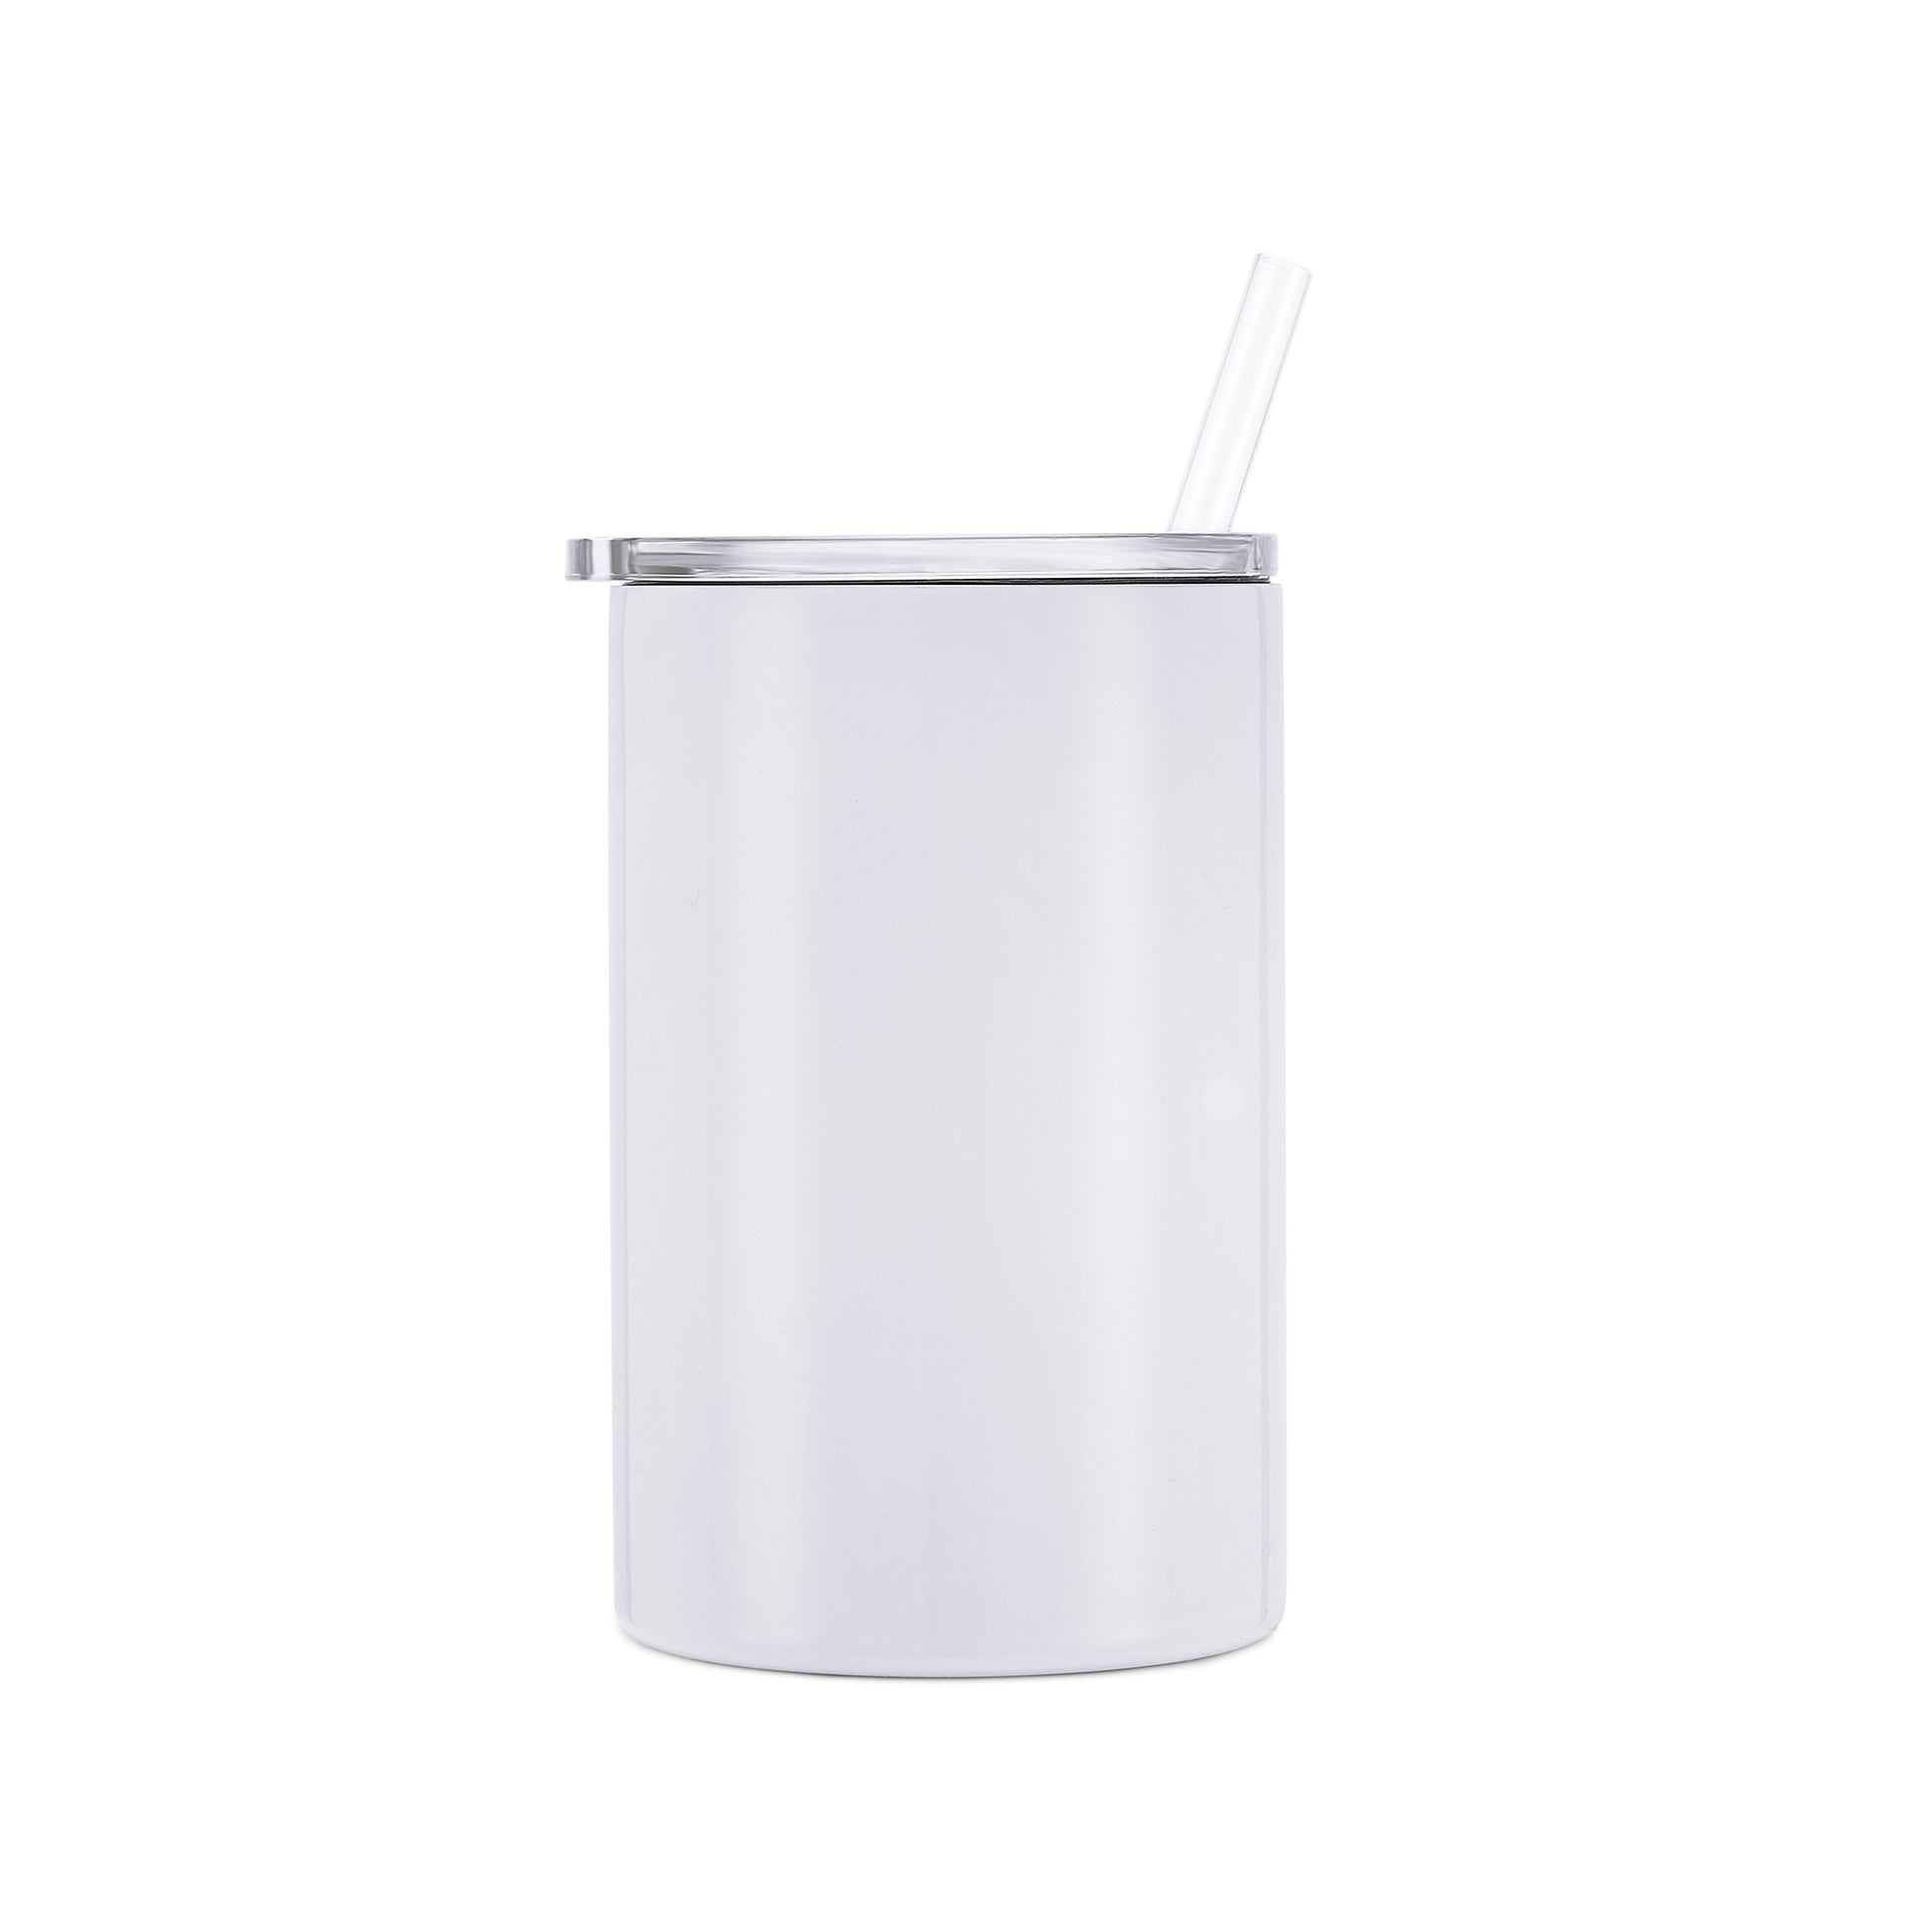 makerflo 12Oz Thick Duozie Sublimation Blank Tumbler with Splash Proof Lid  & Straw, DIY Gifts, 1 pc White - Yahoo Shopping